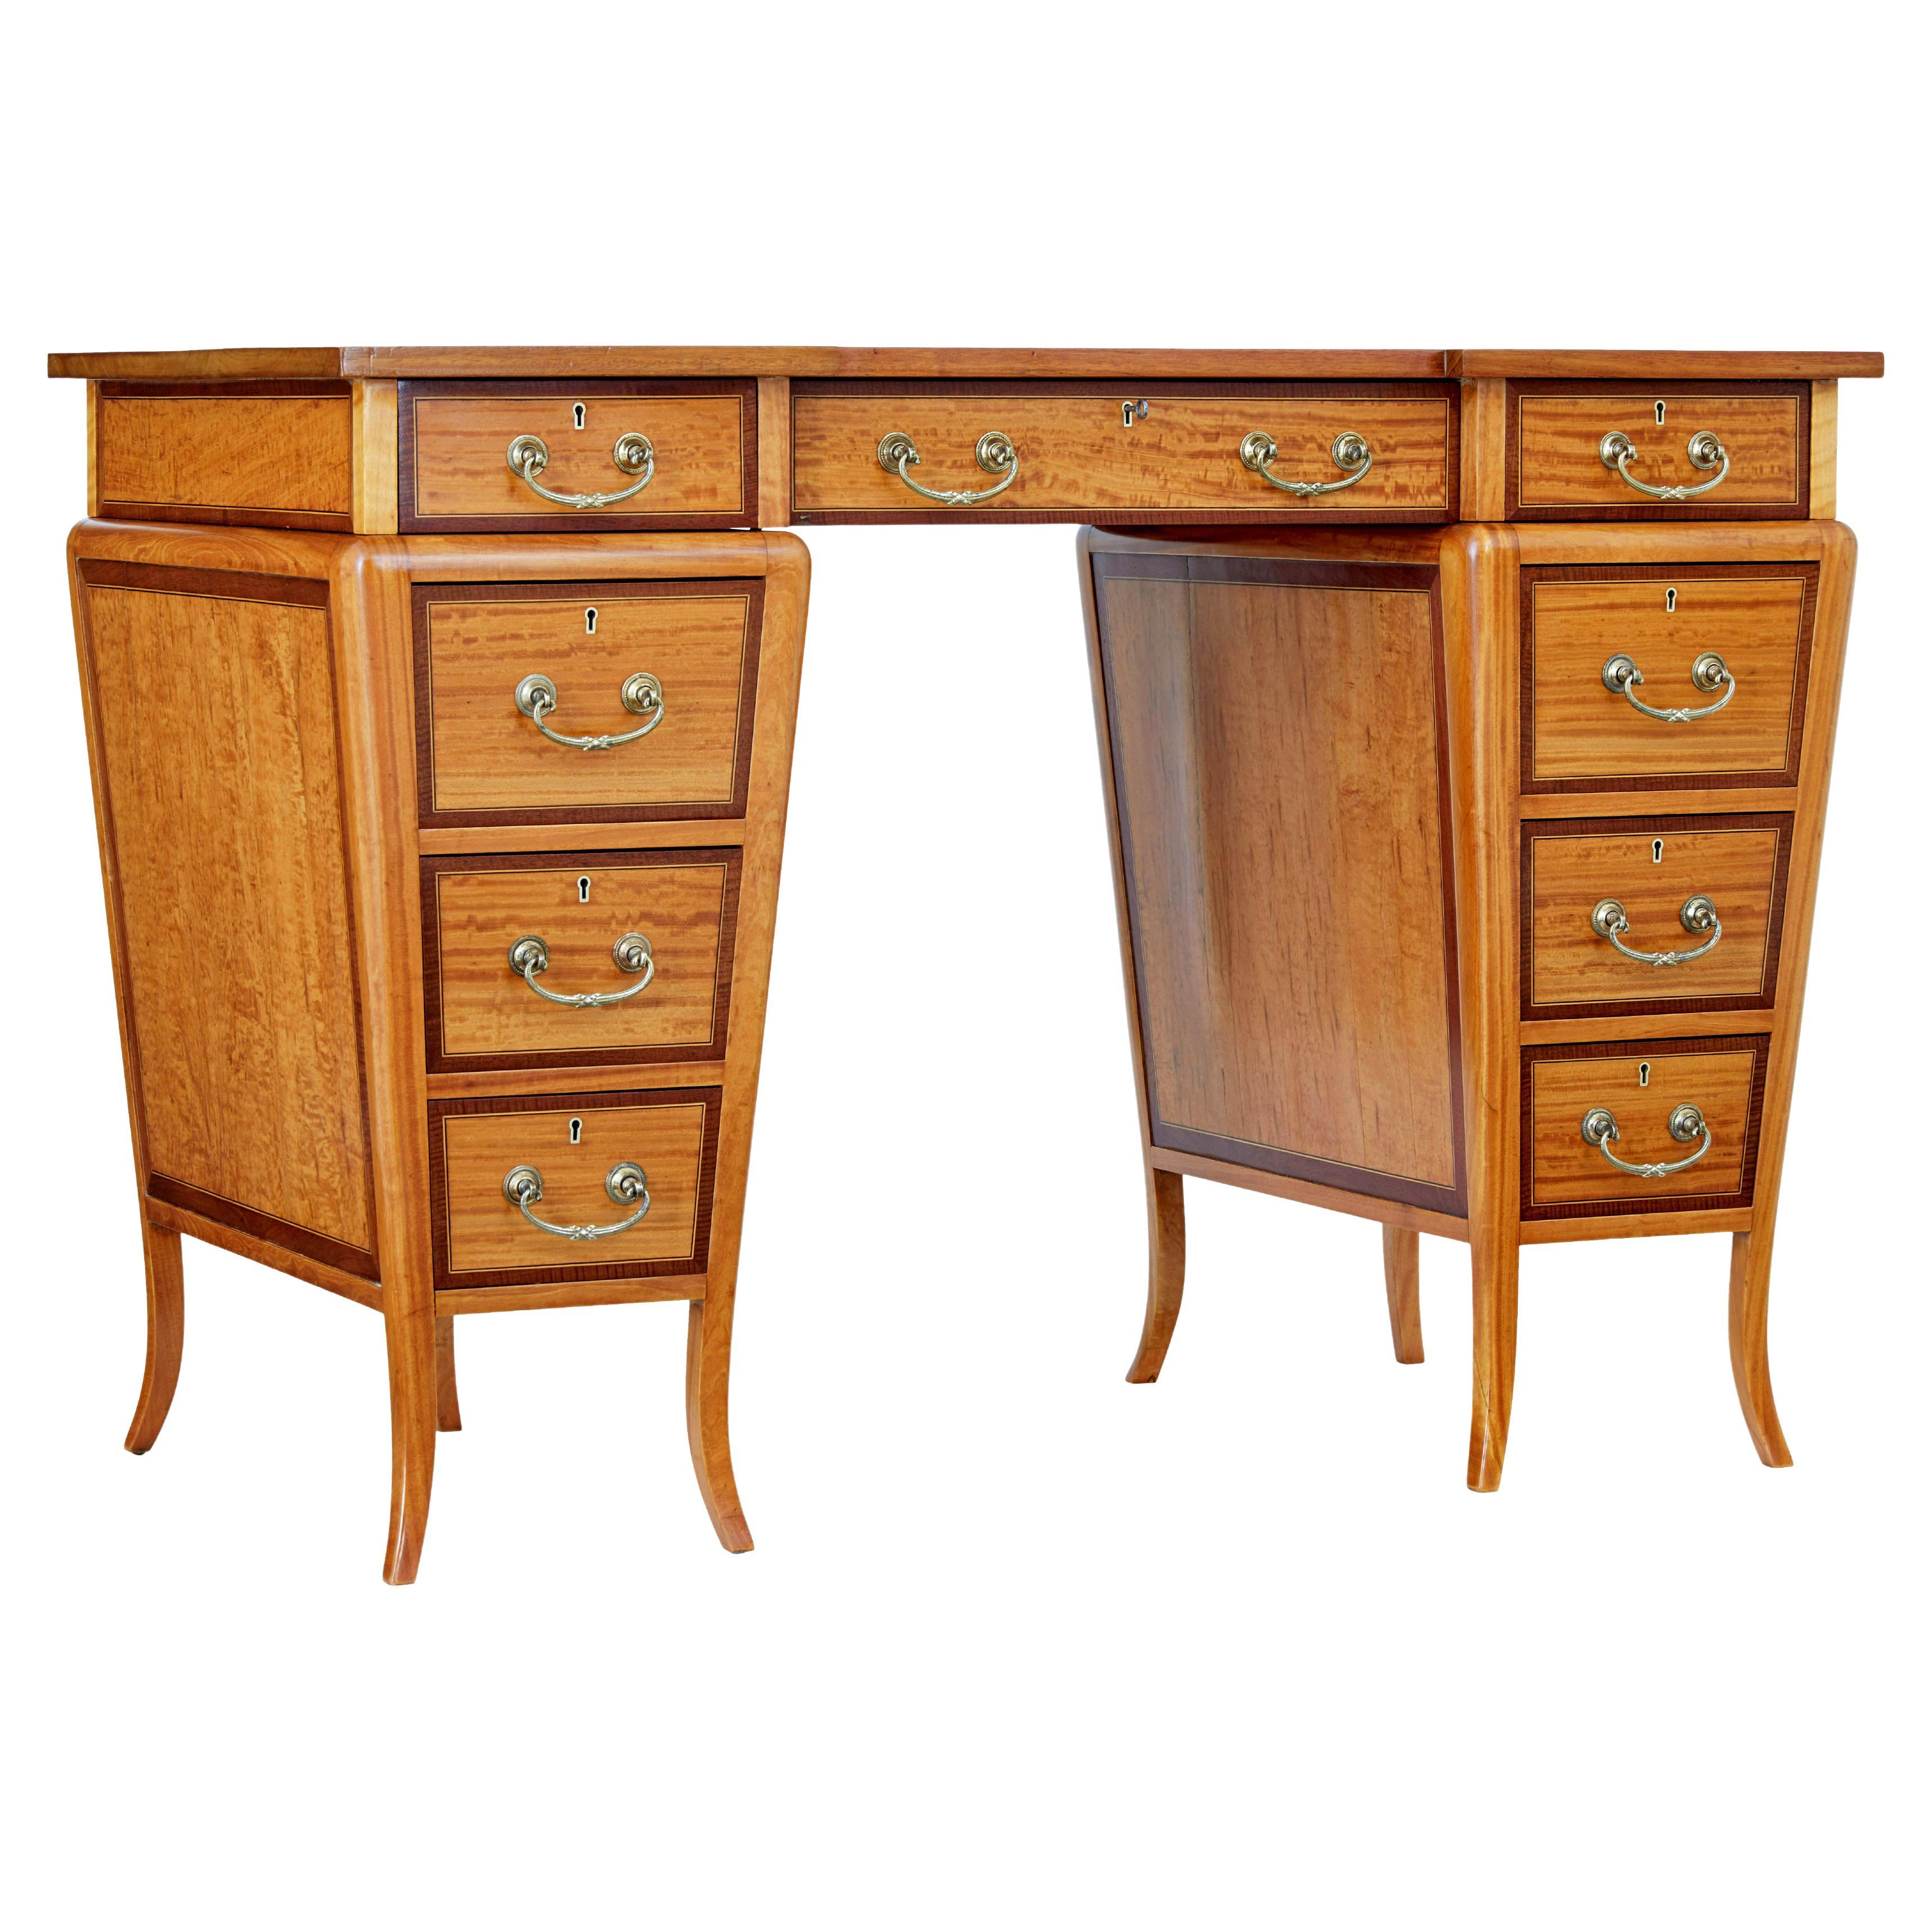 Early 20th century satinwood sheraton revival desk